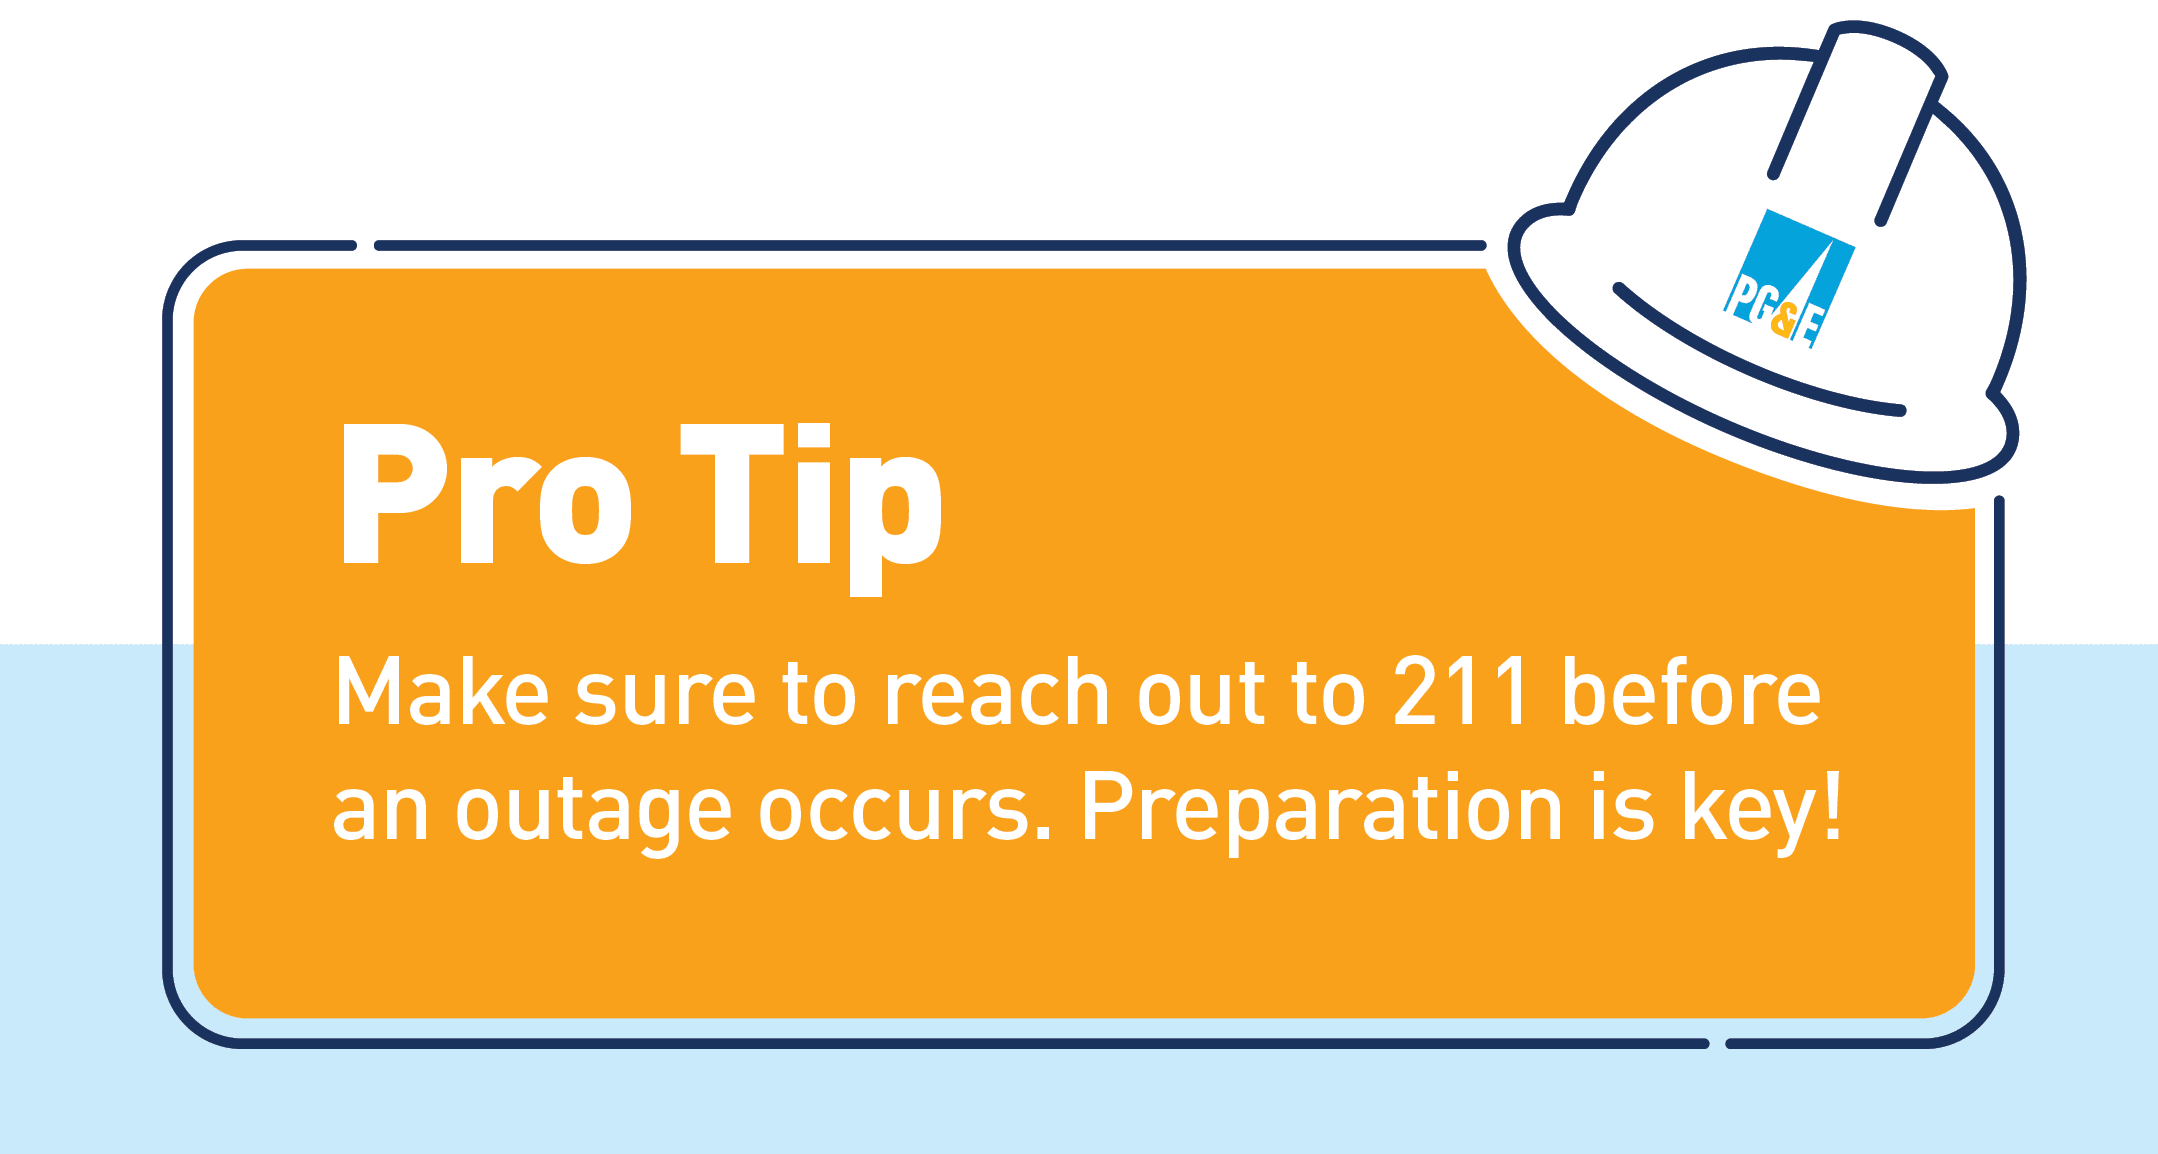 Graphic of a white PG&E helmet. Text: Pro Tip: Make sure to reach out to 211 before an outage occurs. Preparation is key!